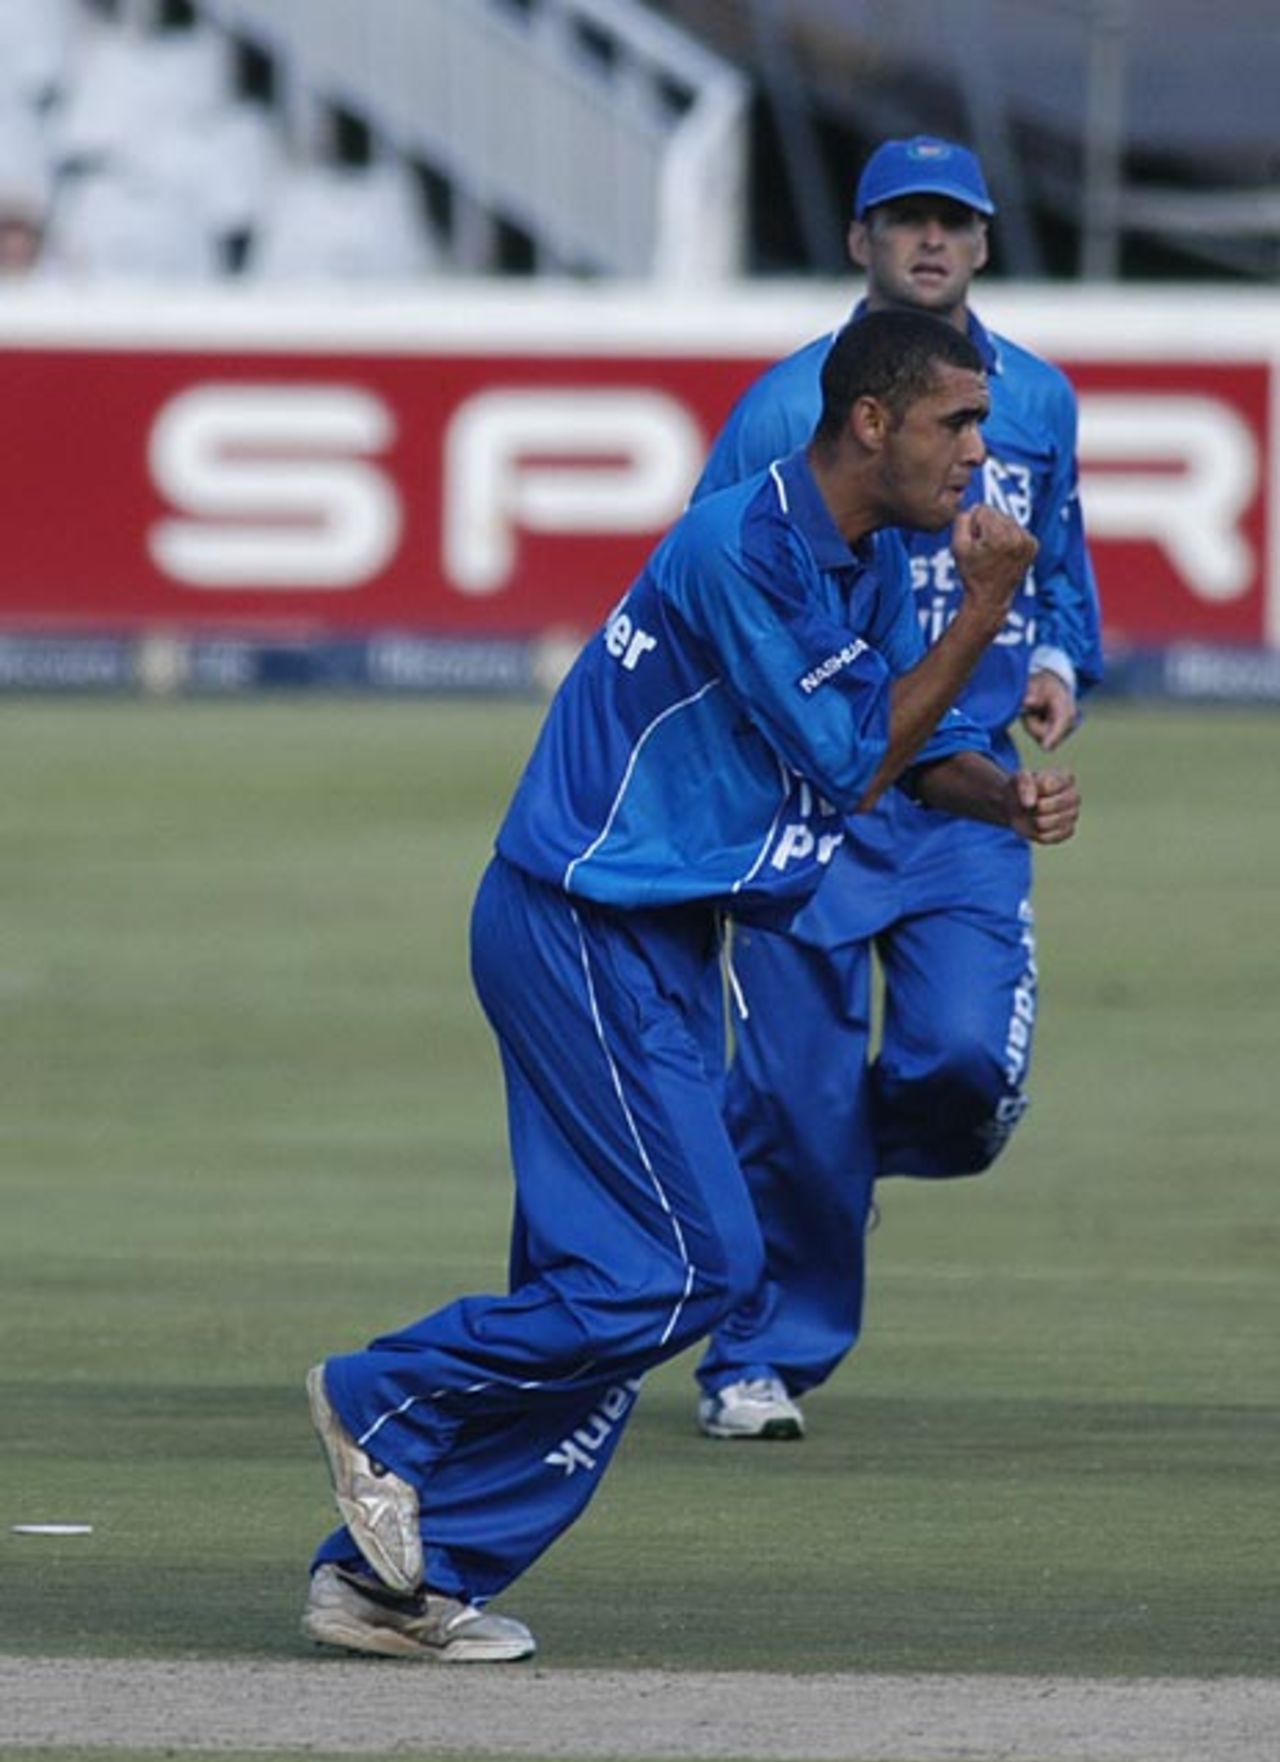 Marc de Stadler celebrates the fall of a Griquas wicket in the Standard Bank Cup Final